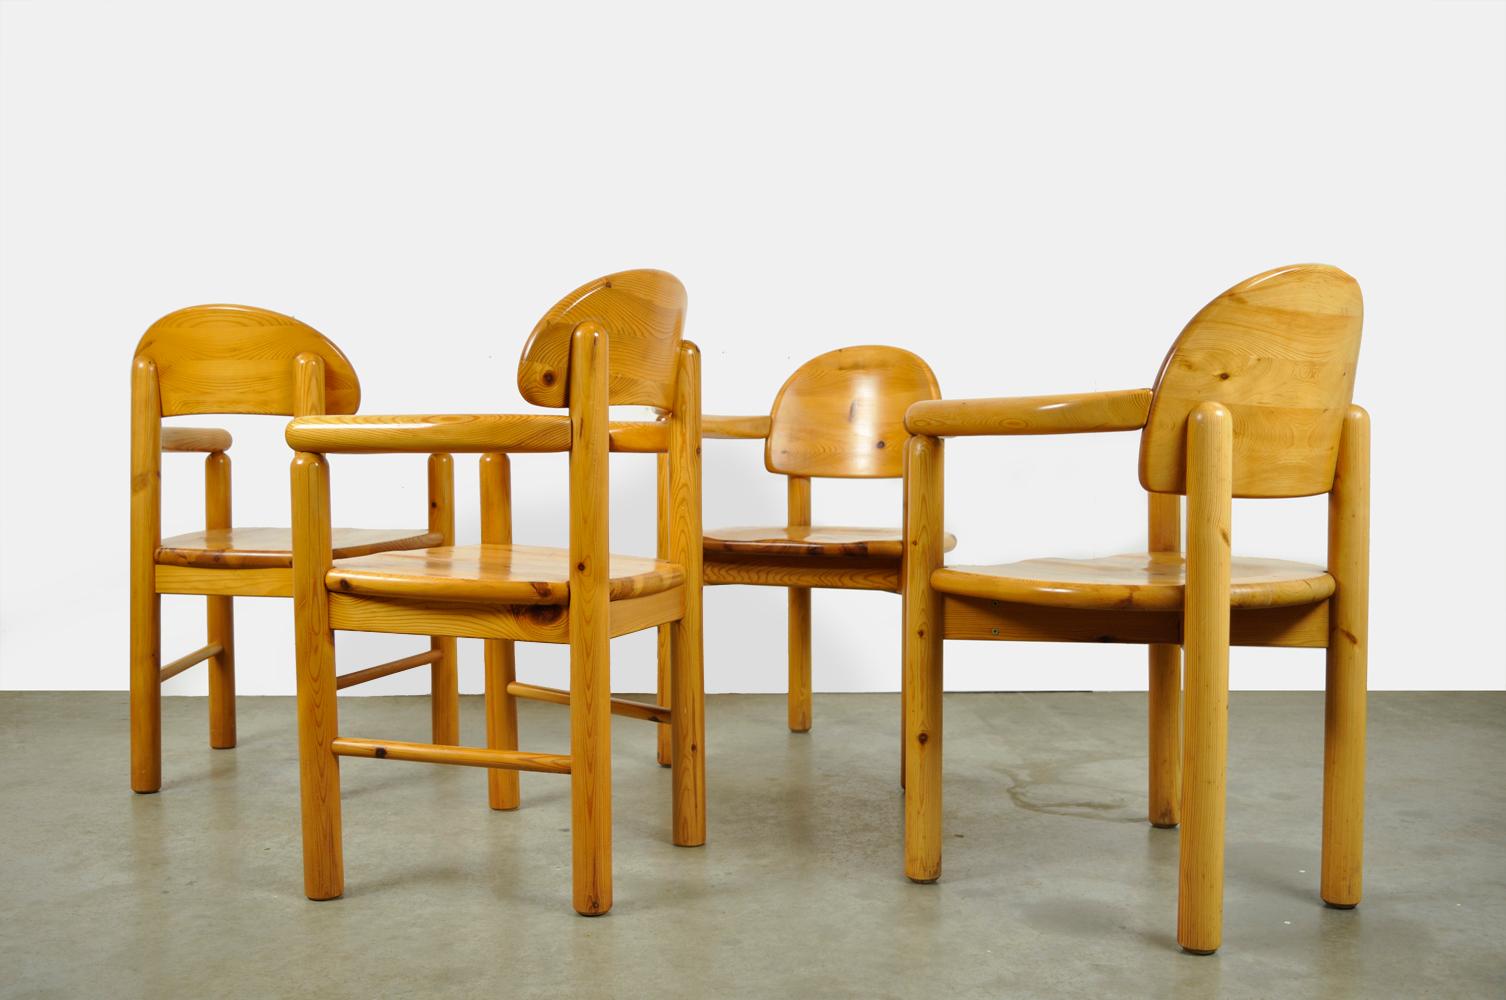 2×2 Vintage Pine Dining Chairs by Rainer Daumiller for Hirtshals Sawmills, 1970s For Sale 1